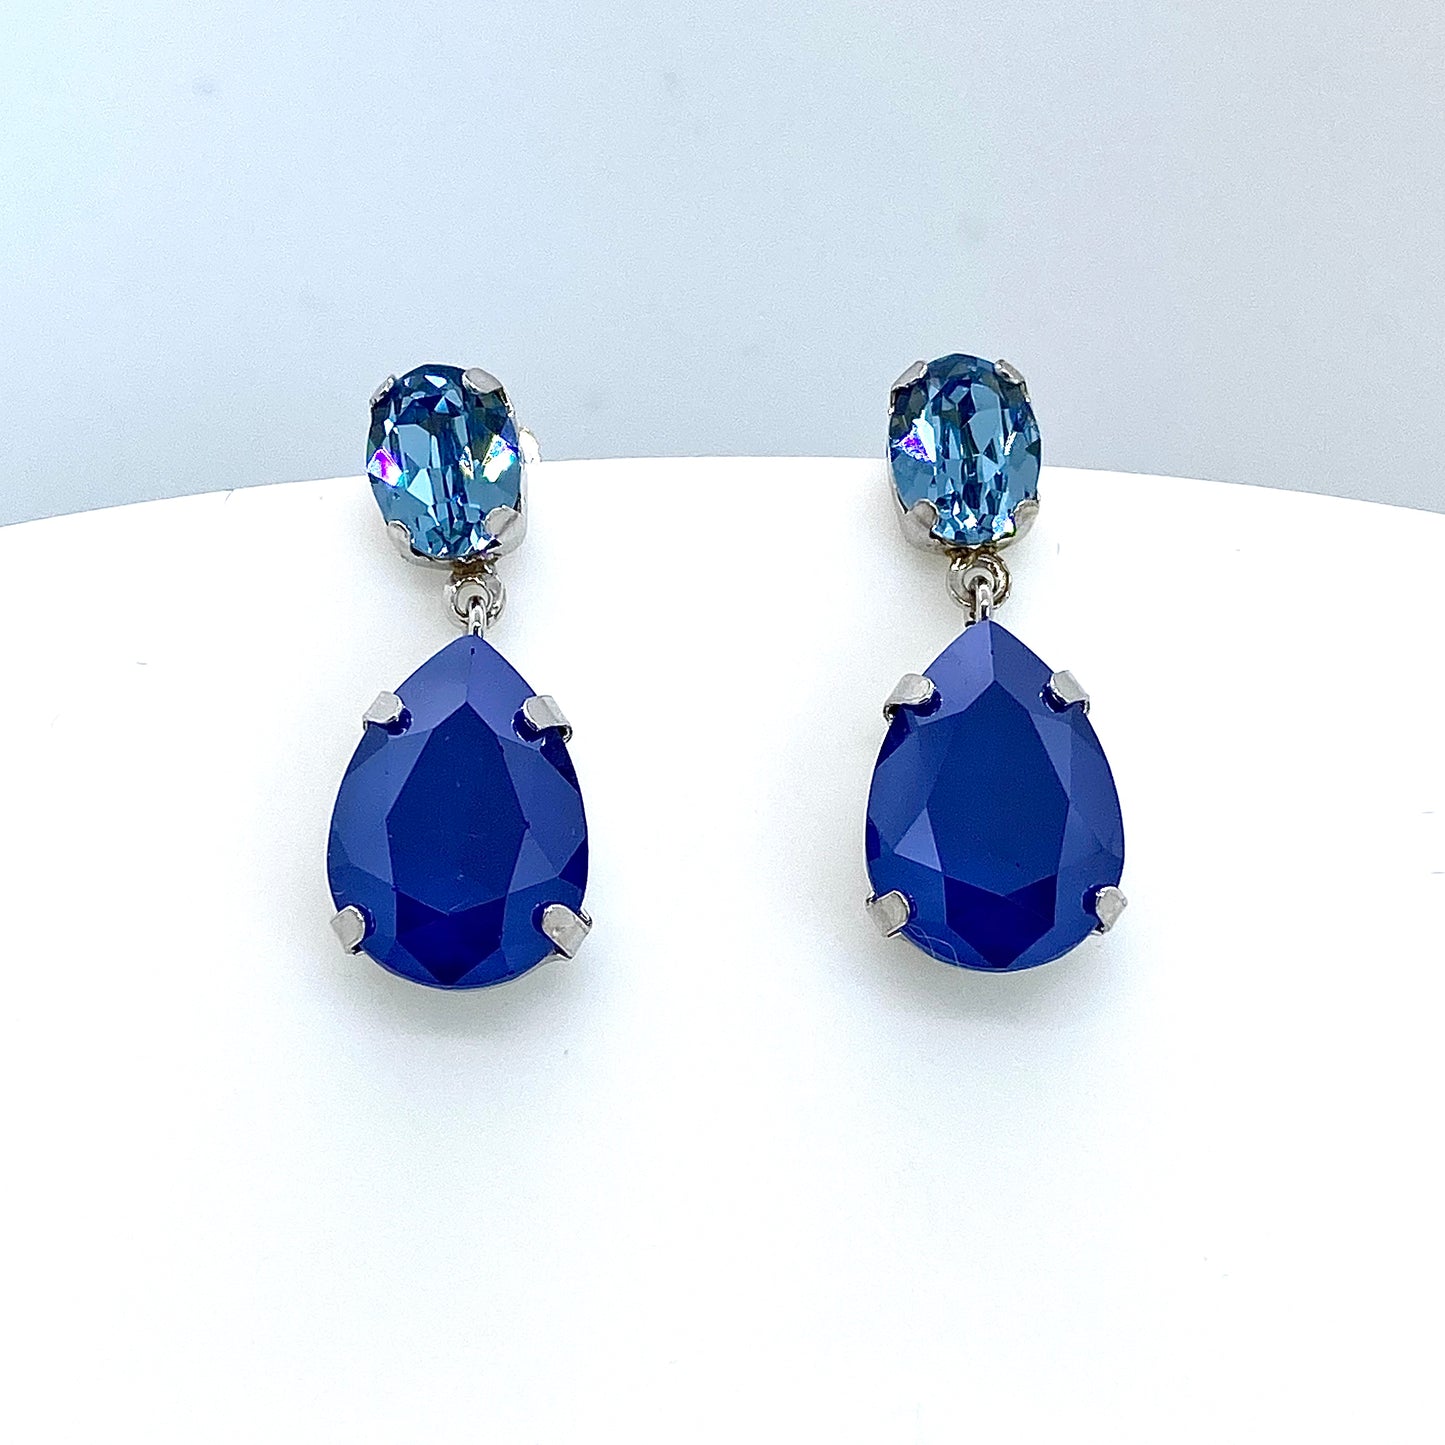 925 silver Celeste royal blue and transparent aqua crystal drop earrings Swarovski® Crystal 25mm L x 10mm L Stud wires with butterfly backs